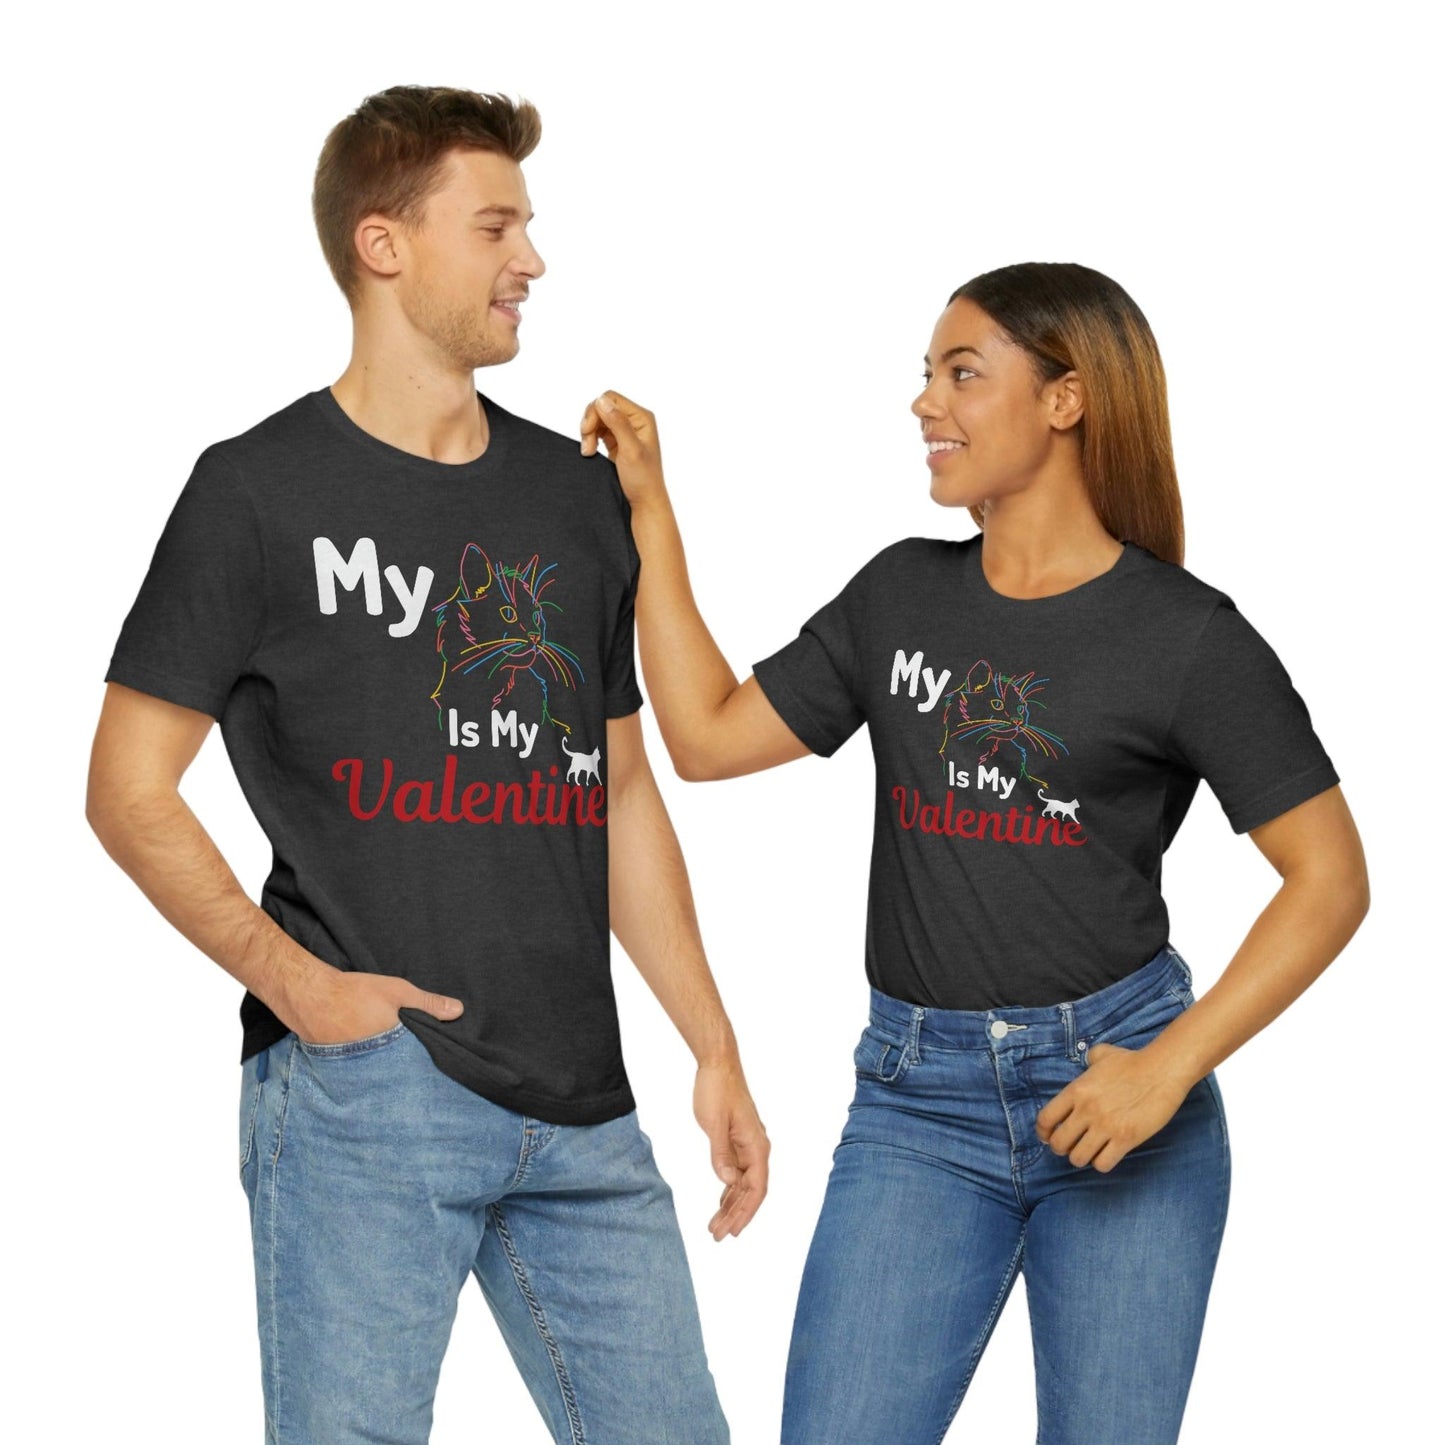 My Cat is My Valentine, Cute Pet lover Valentine shirt - Cute Cat lover shirt - Cat Mom shirt - Giftsmojo